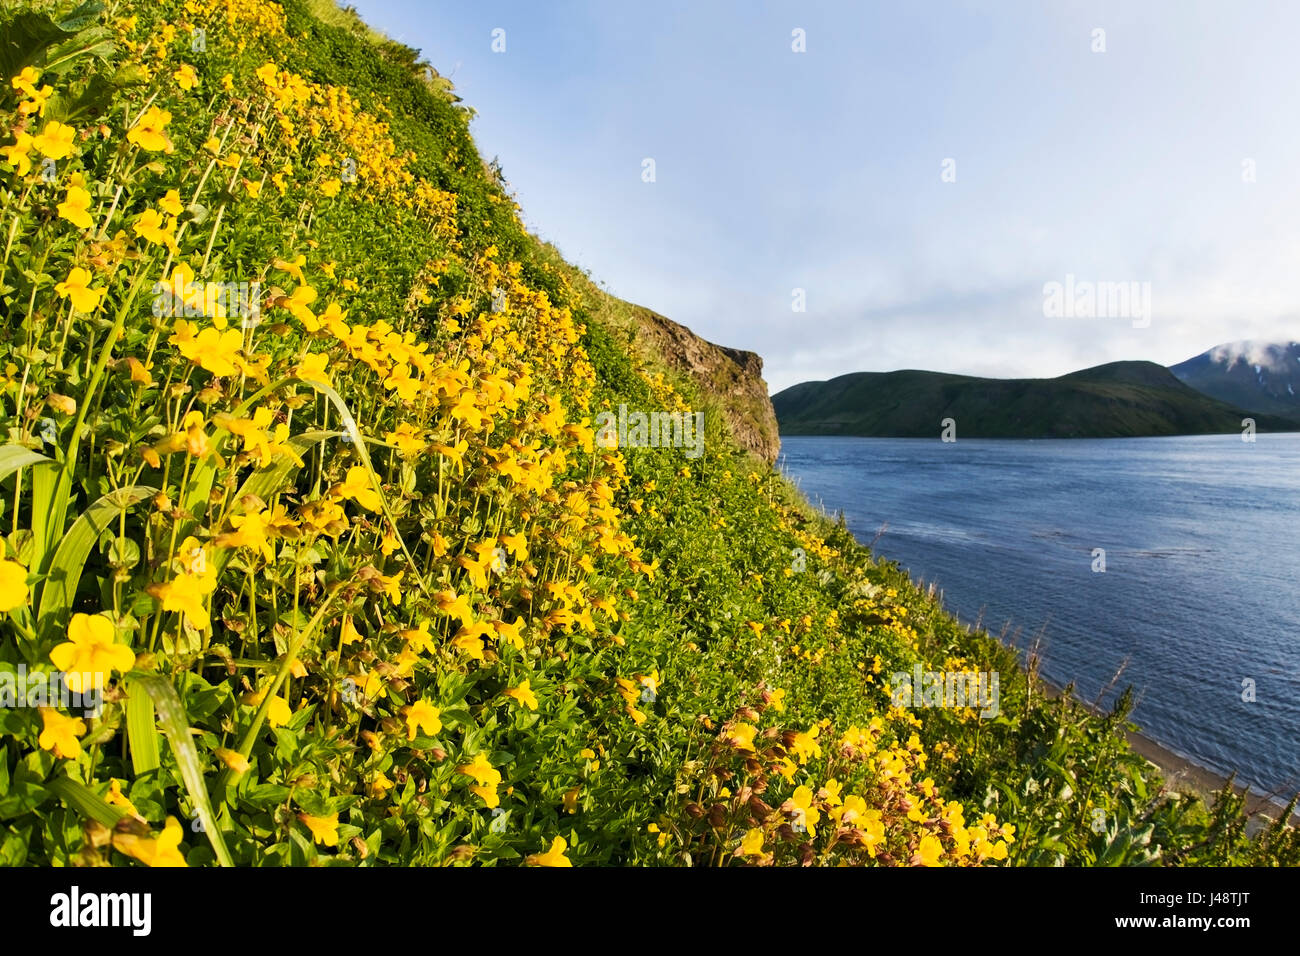 A Hillside Covered By A Variety Of Monkey-Flowers (Mimulus) And Views Of The East End Of Unimak Island On The Edge Of Isanotski Strait, False Pass,... Stock Photo